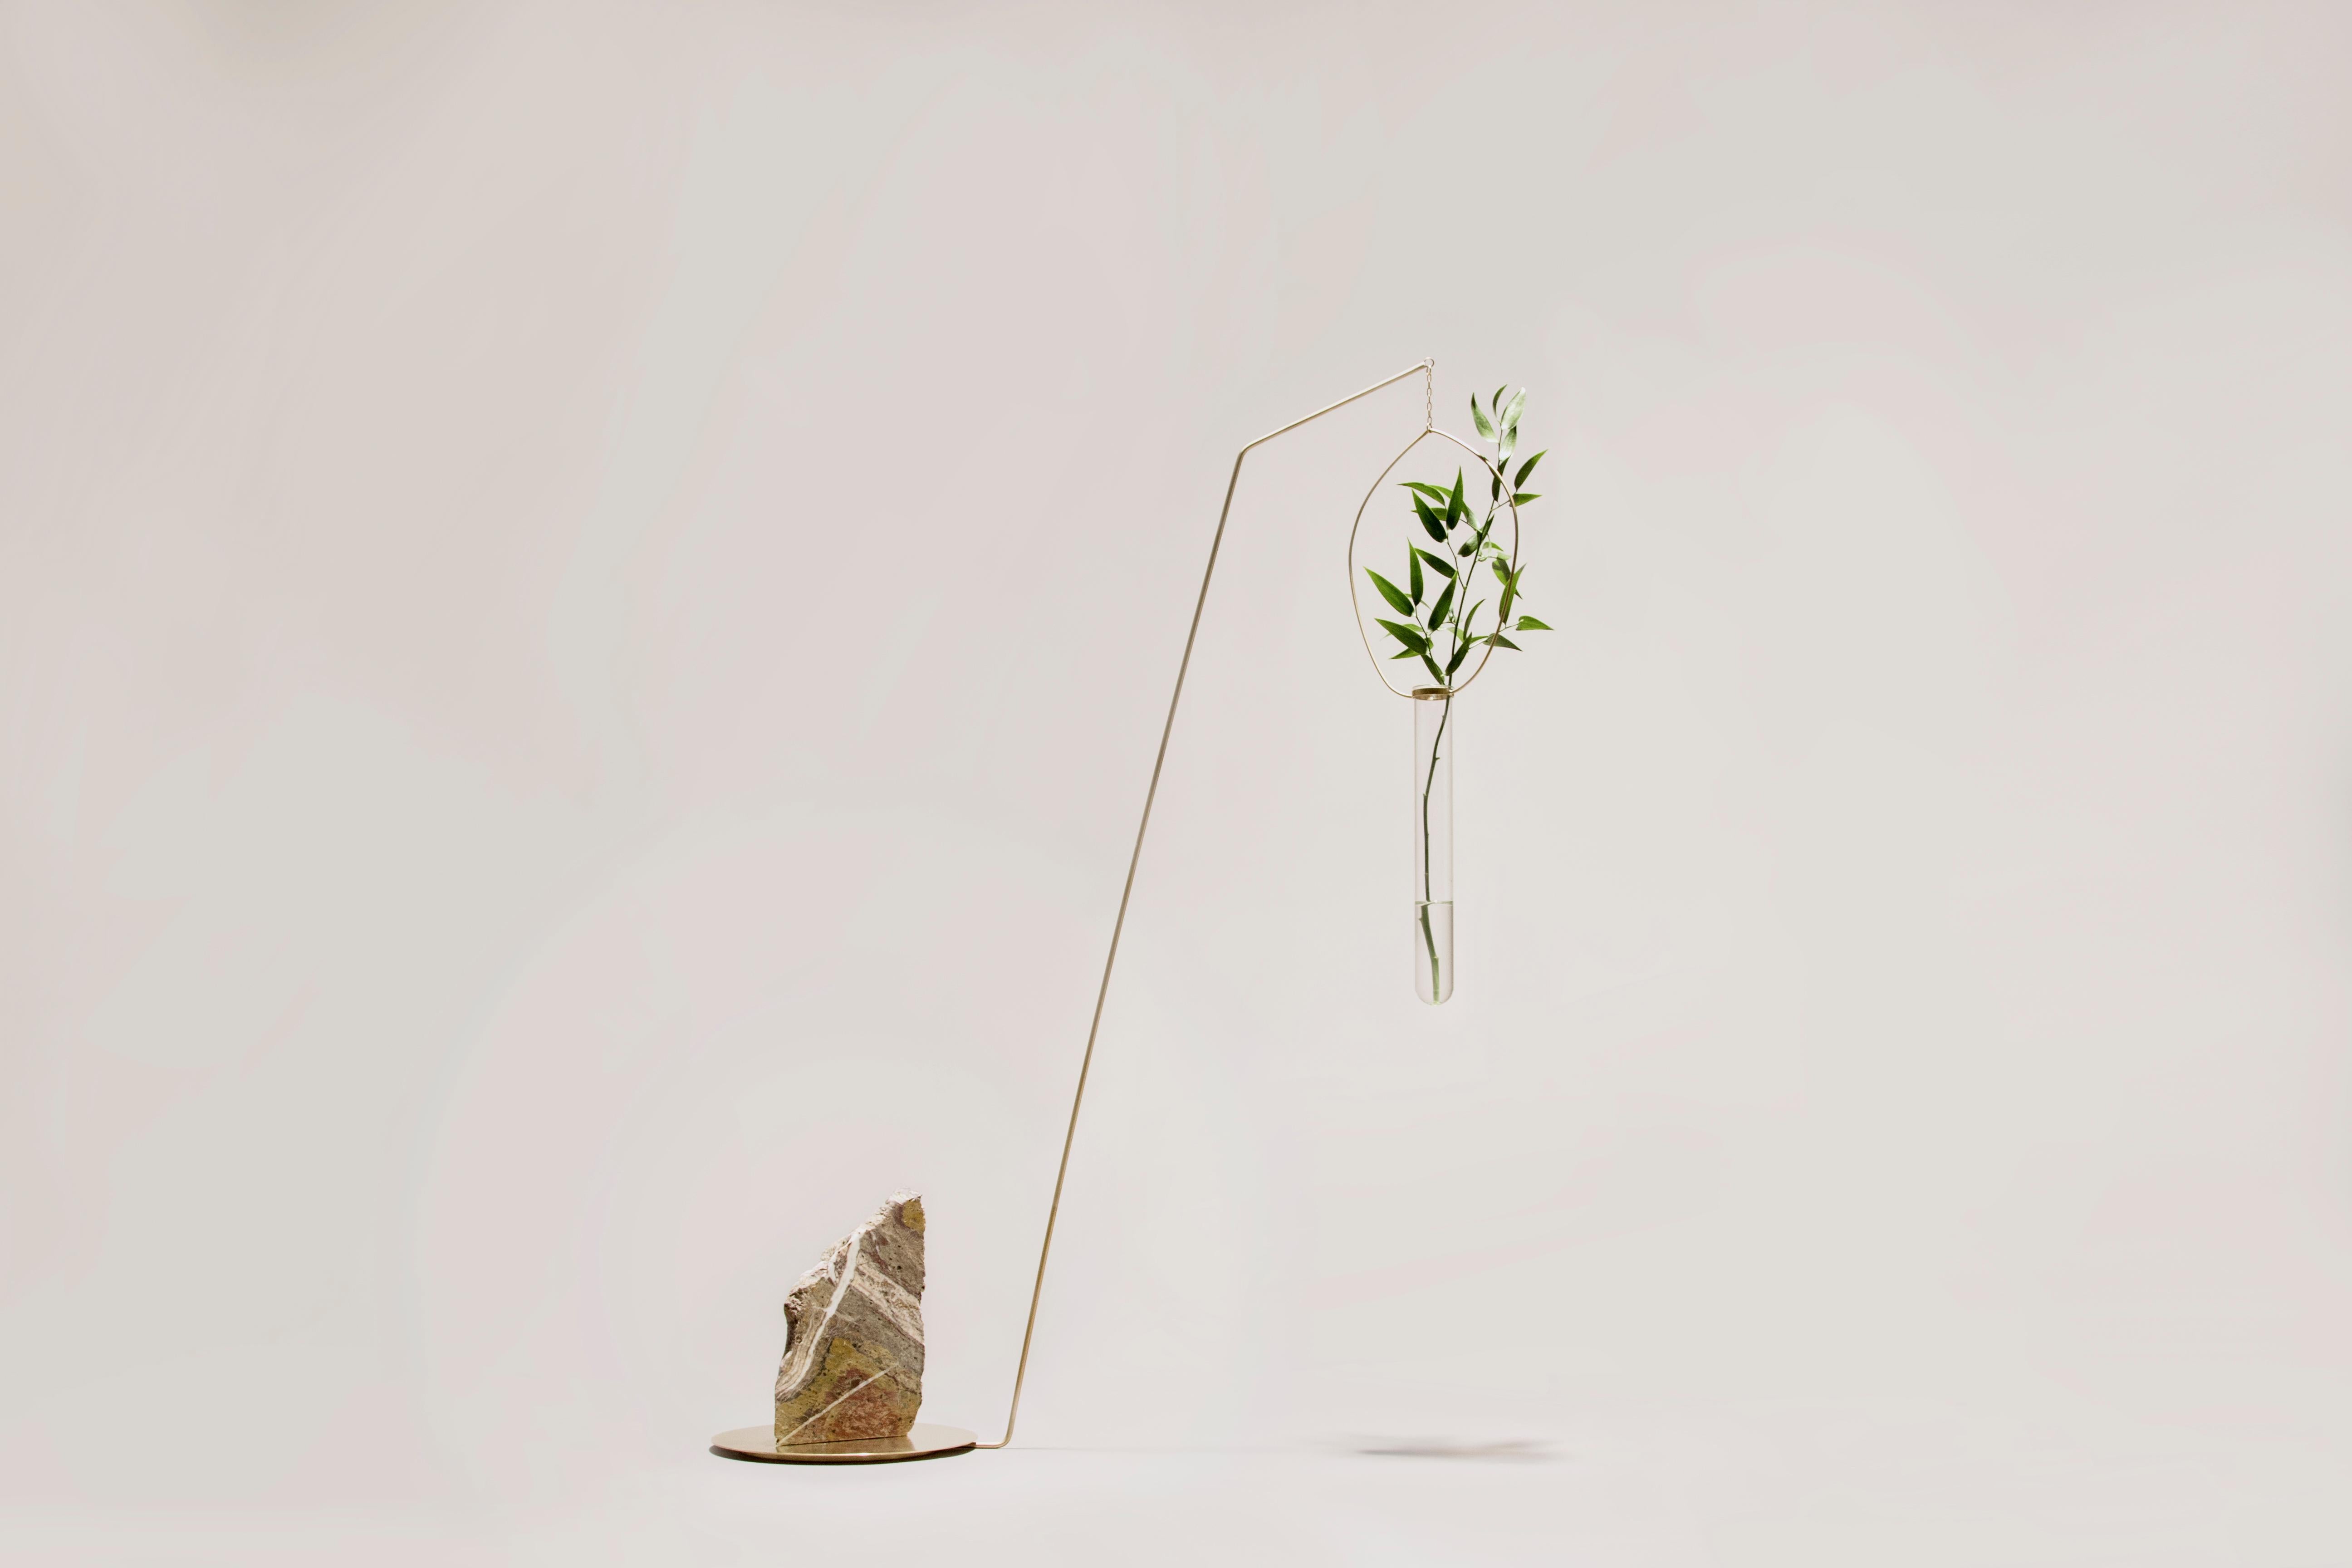 Eden — sculpture
Eden is a Kinetic sculpture, composed by small floating vases that celebrate natural beauty and balance.
Materials: handcrafted solid brass with satin finish, borosilicate glass
Dimensions: 75 x 35 x 10 cm

The project is